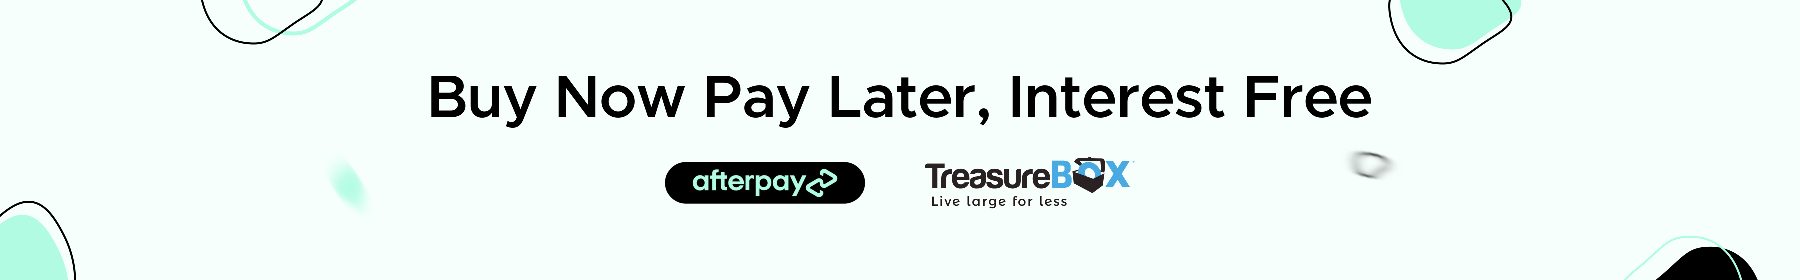 Buy Now Pay Later Interest Free